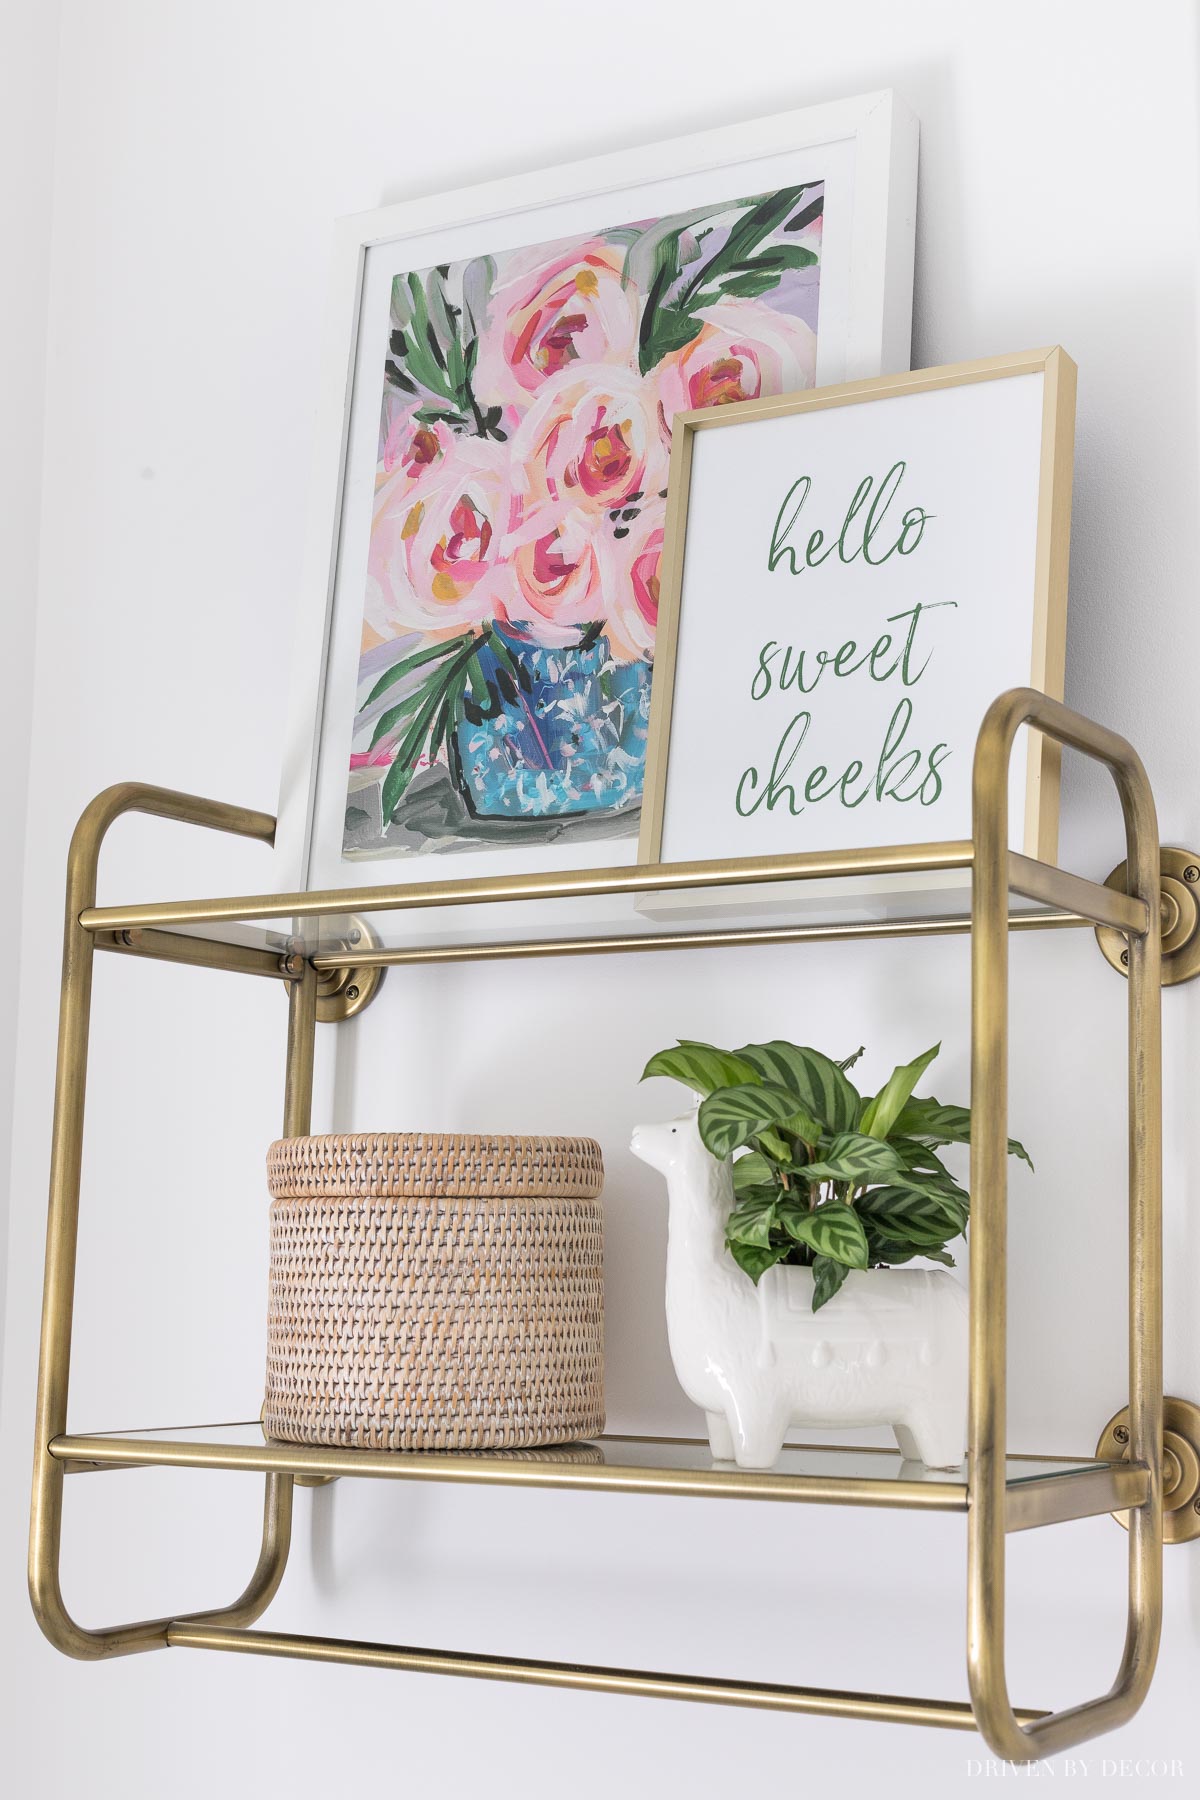 This wall mounted shelving is perfect for storage in a small bathroom